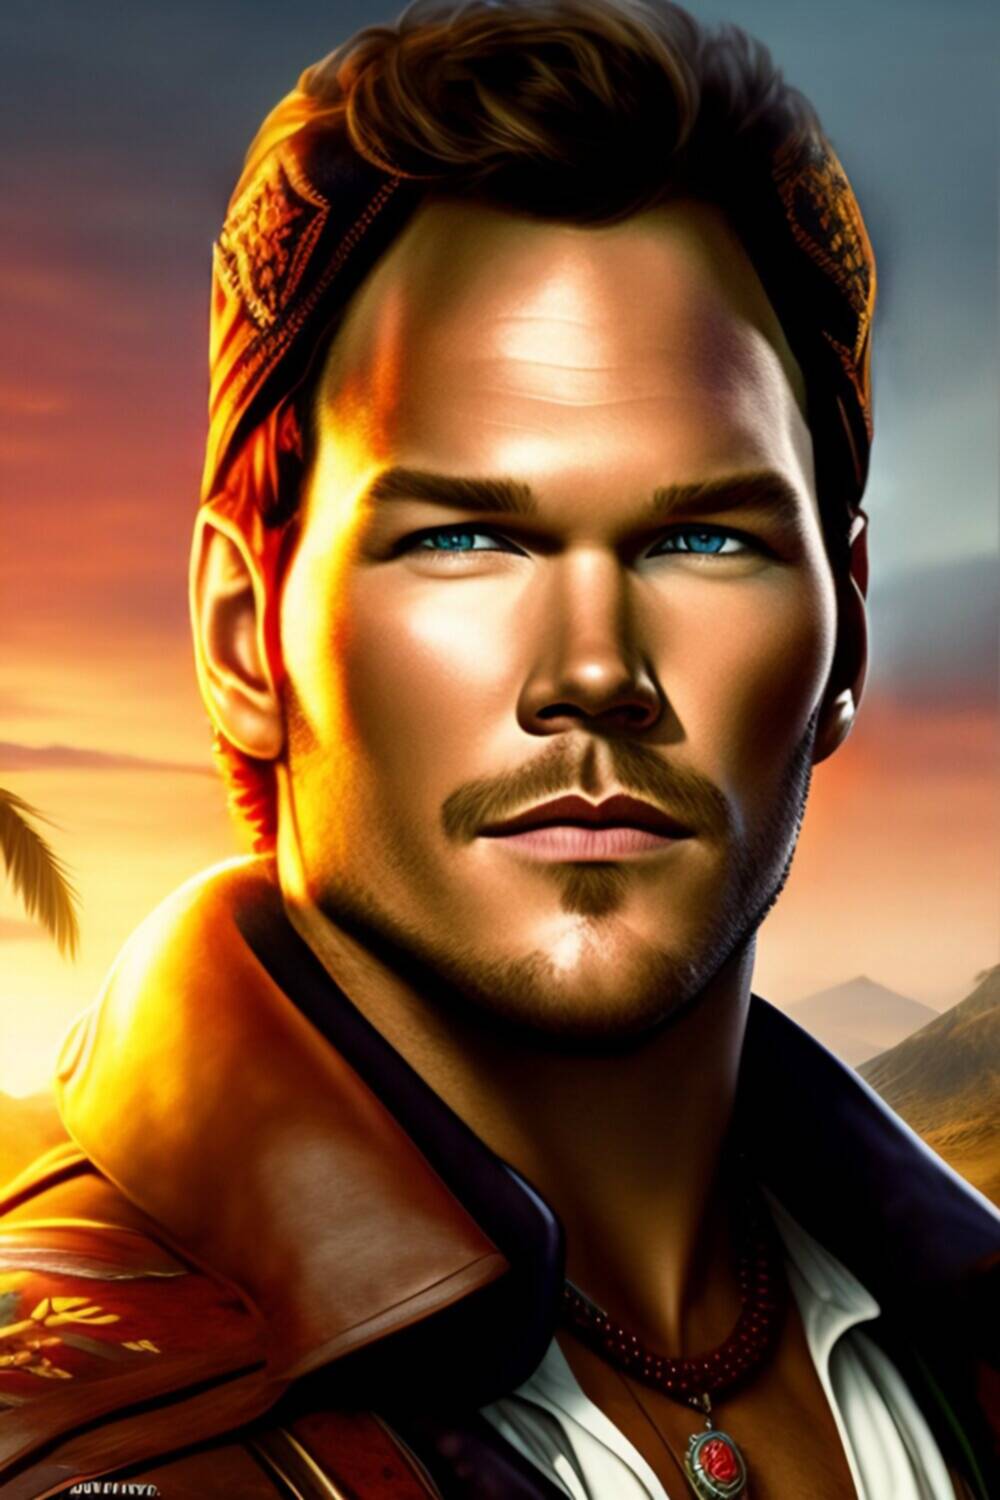 Revealing the Obscure Locations Tied to Chris Pratt's Birthplace